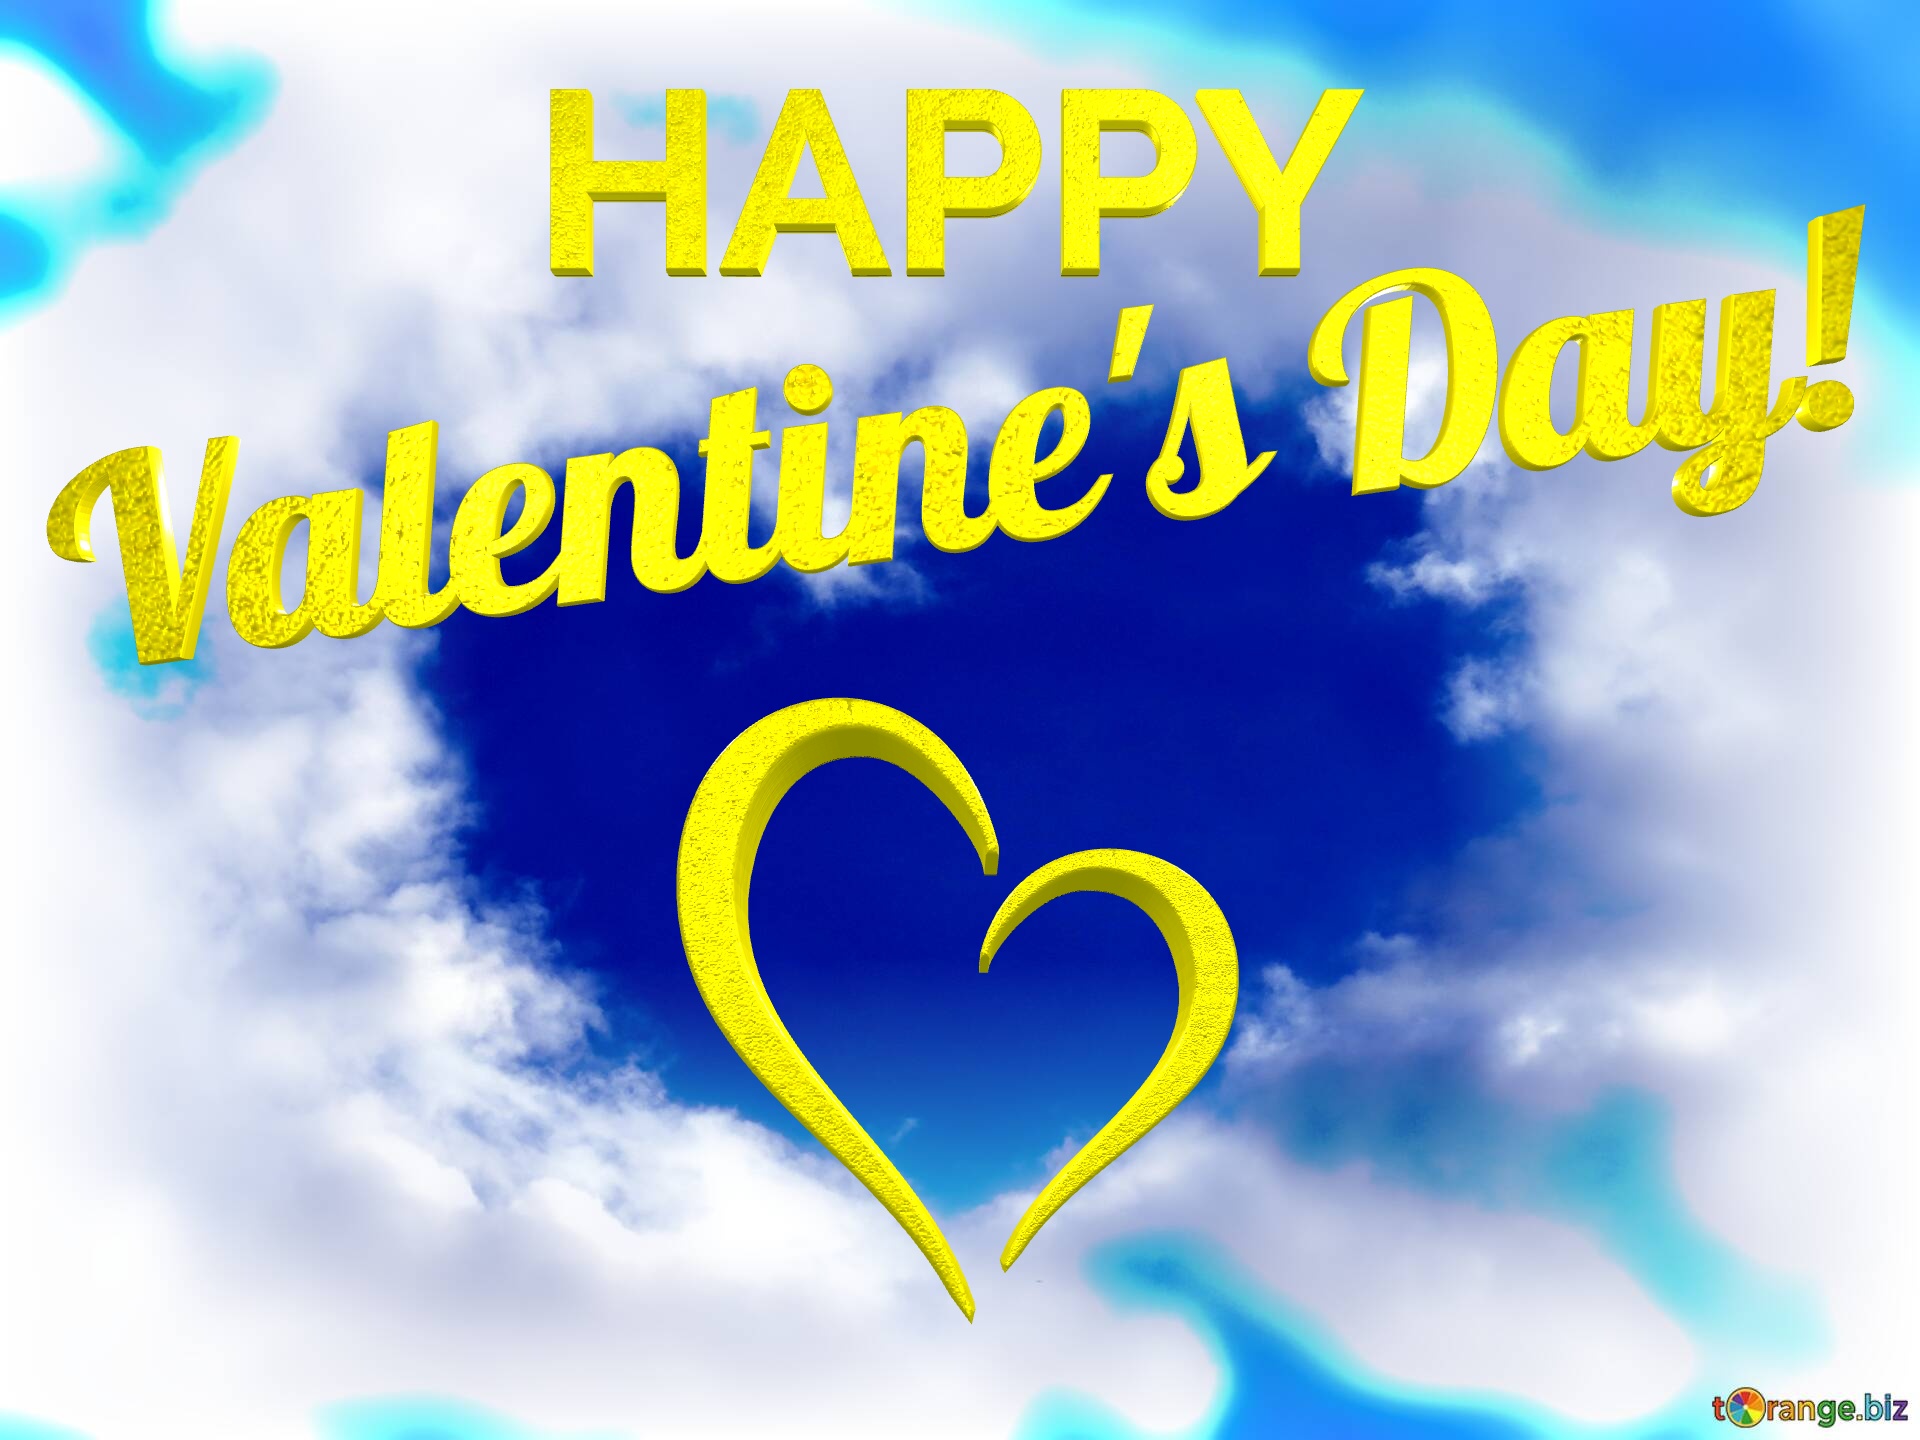 Sky Valentine`s Day! HAPPY Clouds Heart №0